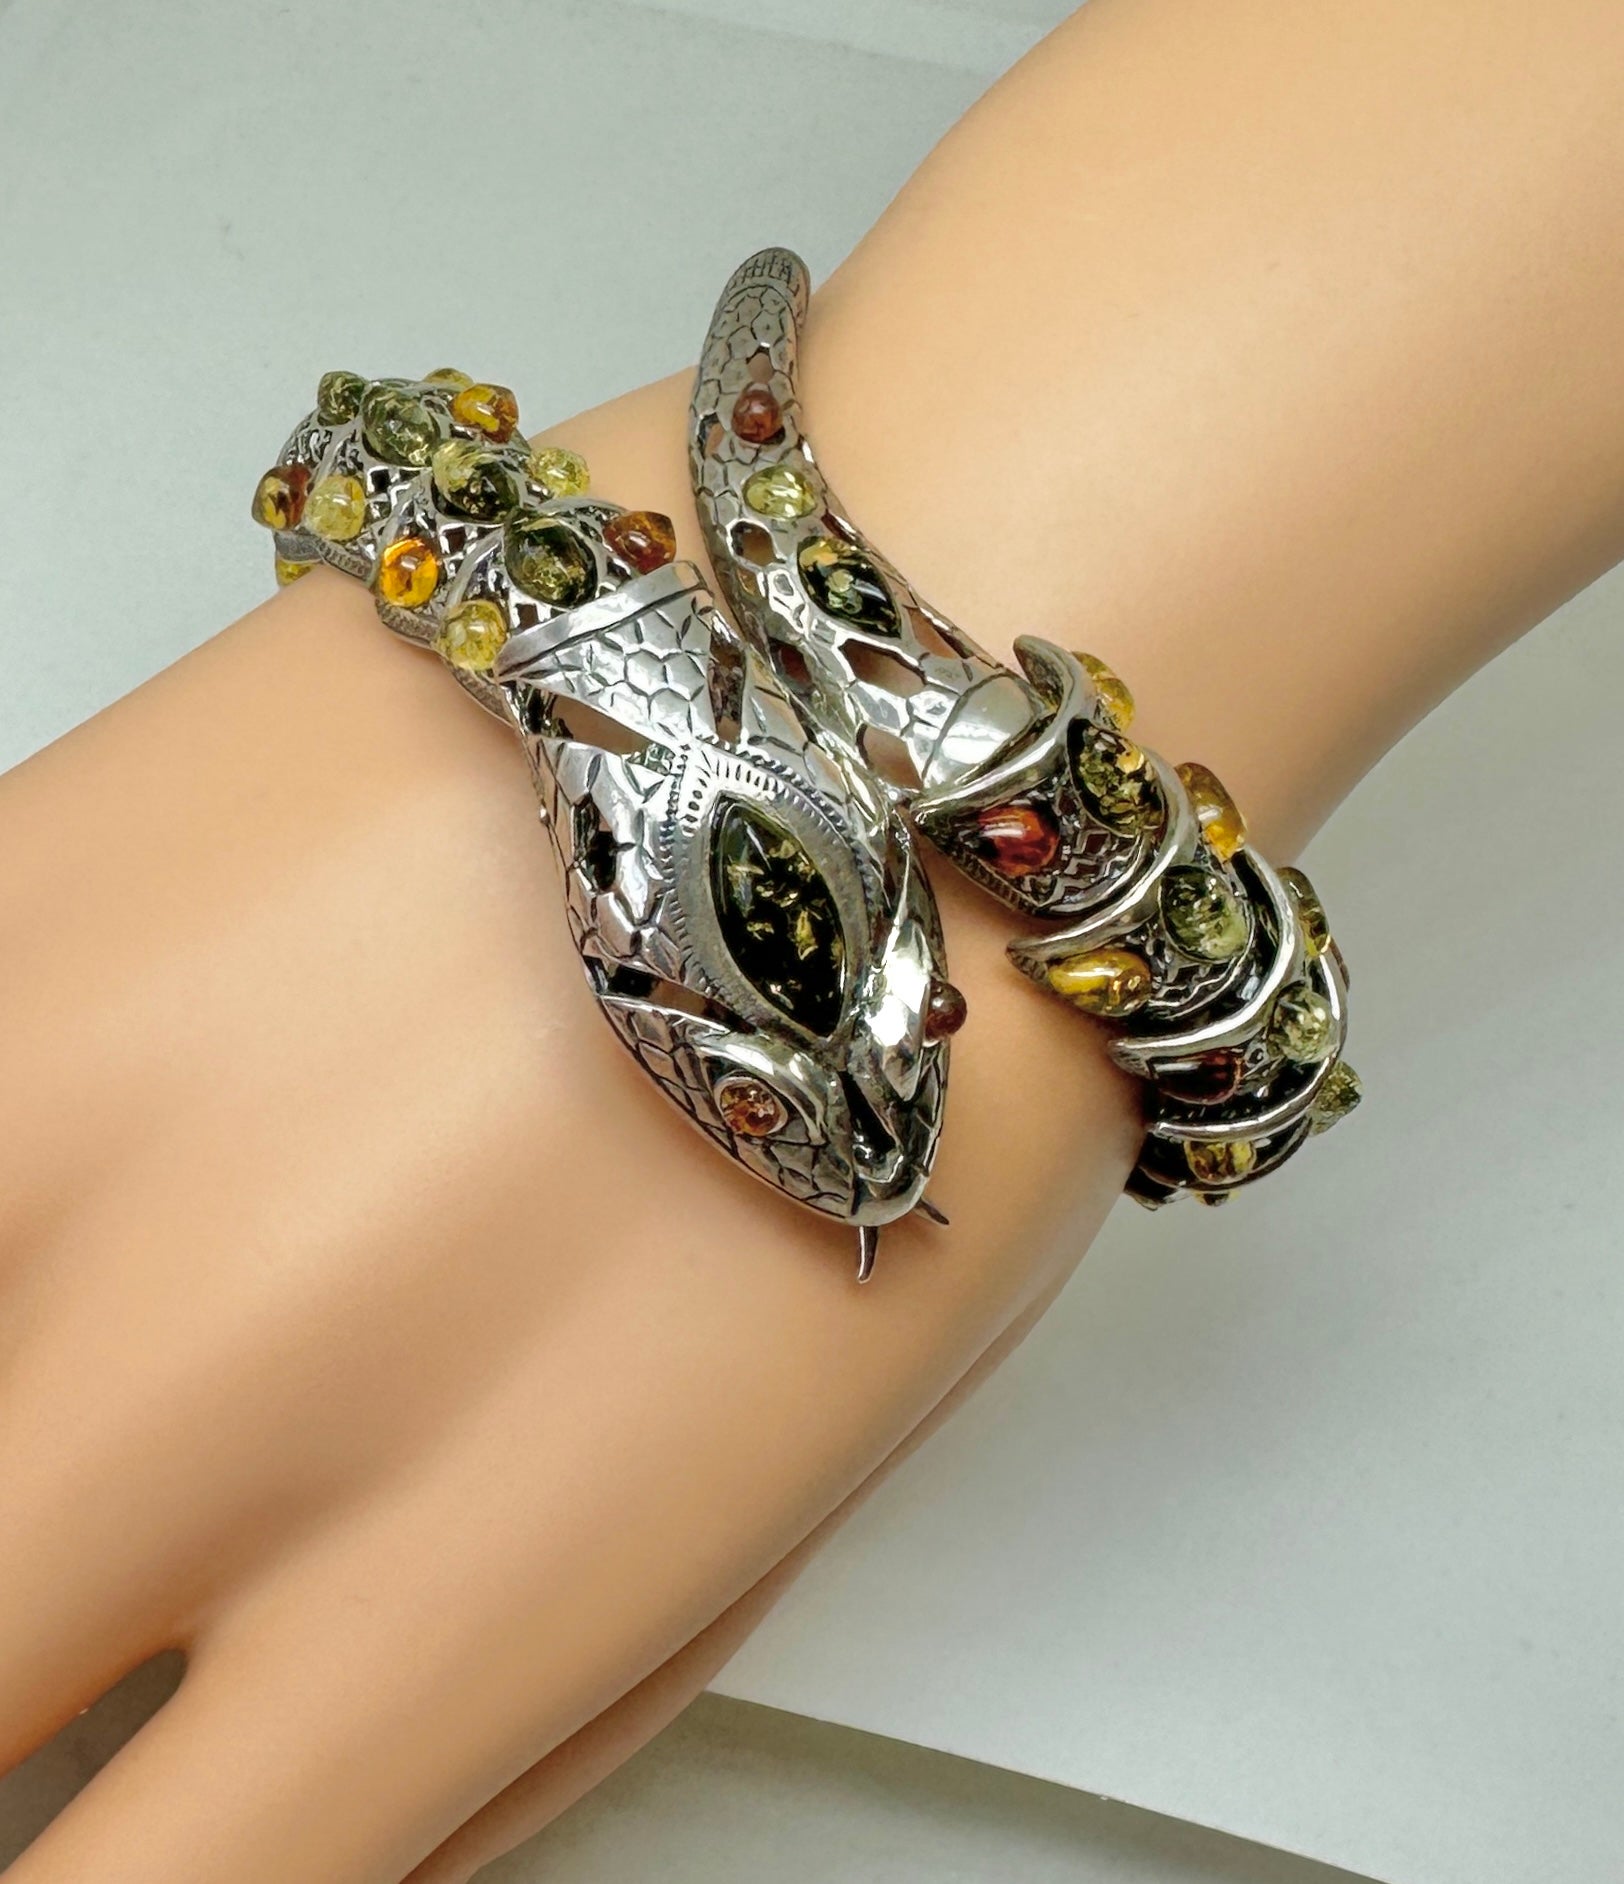 This is a wonderful Snake Bracelet in Sterling Silver set throughout with beautiful Amber gems.  The design is stunning with articulated sections each set with Amber in Sterling Silver.  The dramatic head of the snake is fabulous and the mouth opens